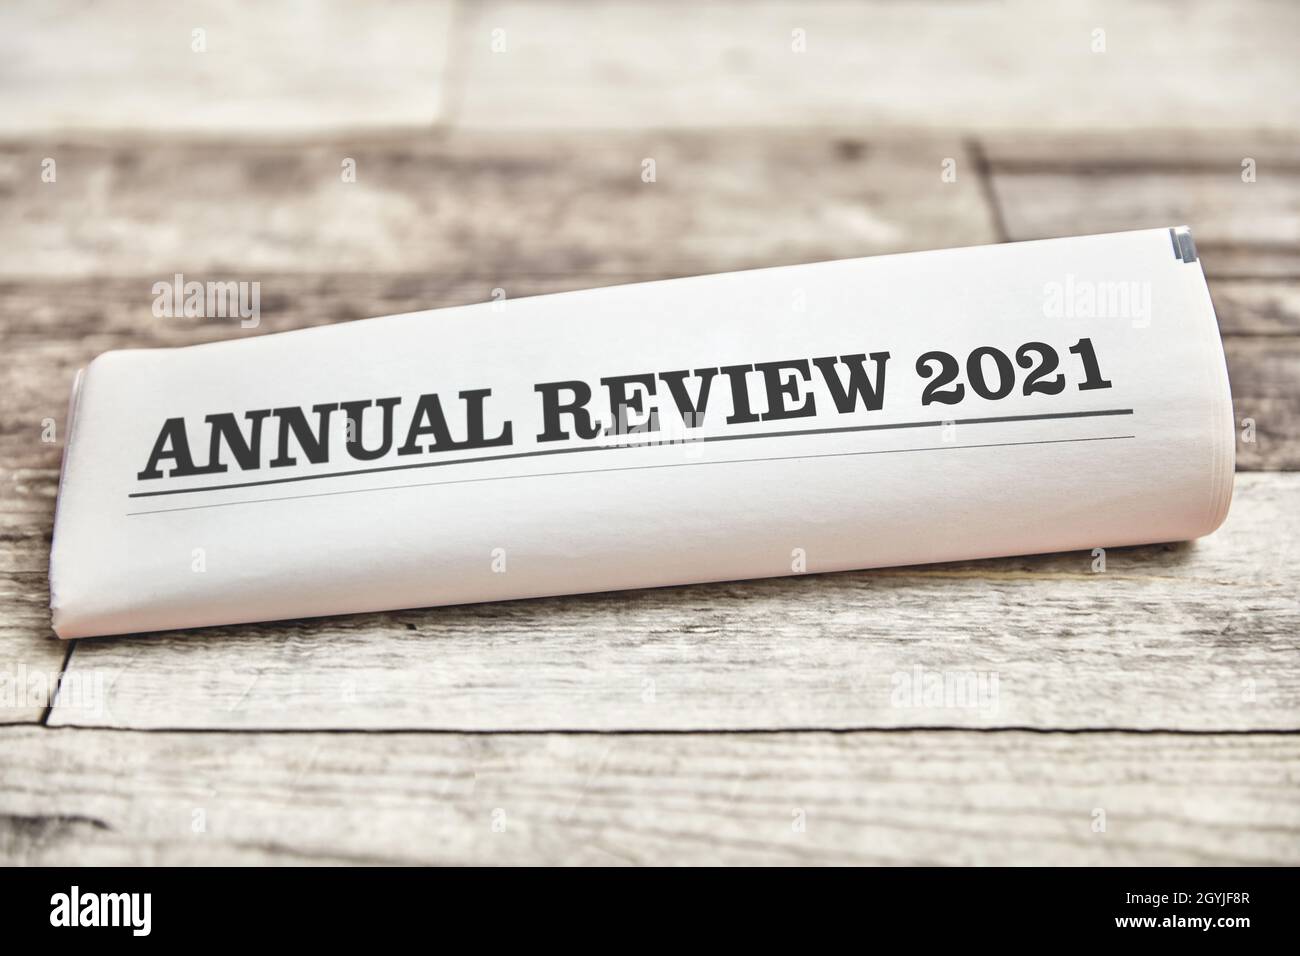 Annual Review 2021 as front page on folded newspaper Stock Photo